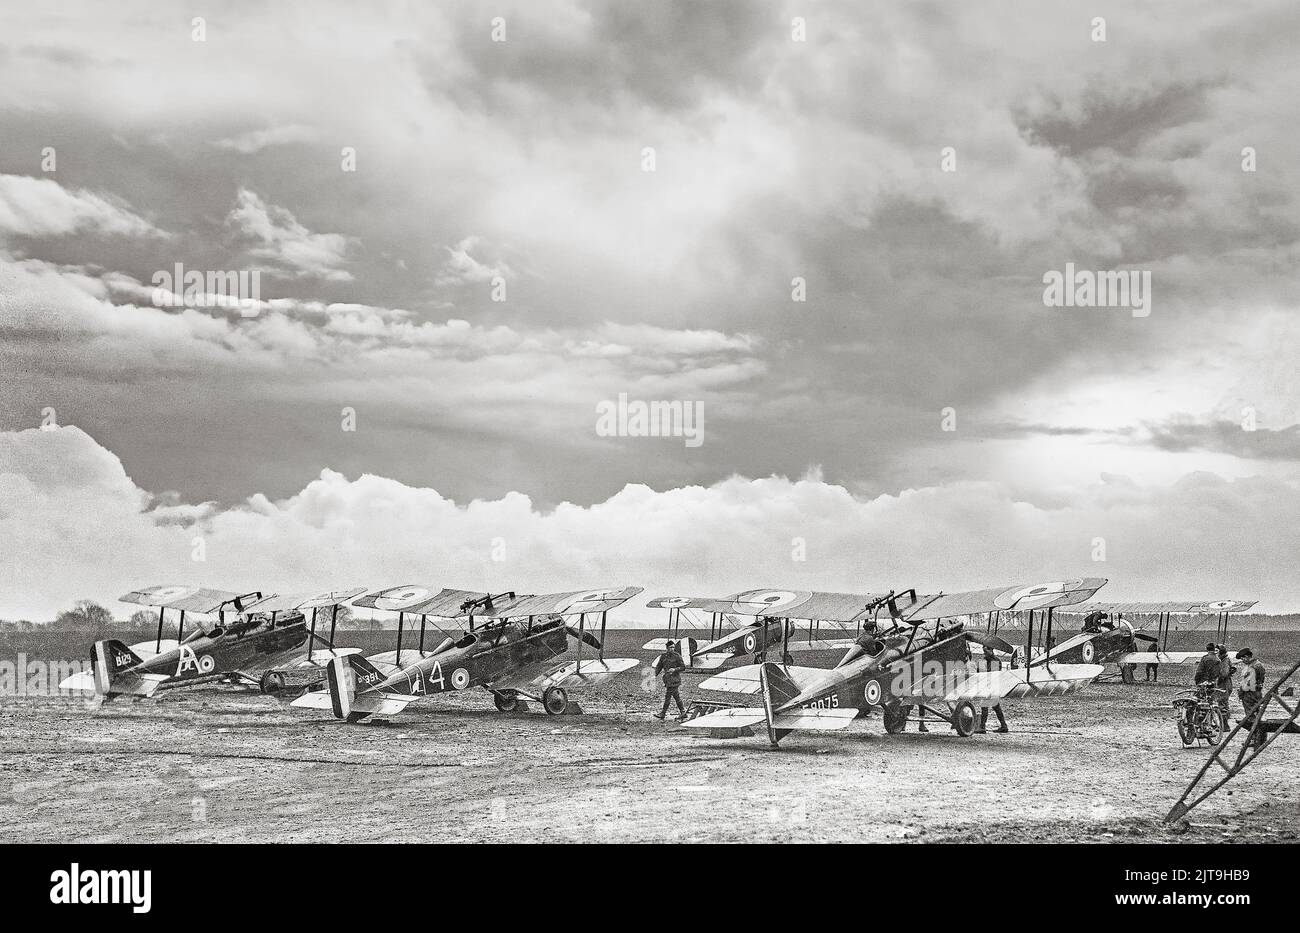 SE5a fighter aeroplanes of No. 6 (Training) Squadron, Australian Flying Corps (AFC), at aerodrome. (1/2r s. Avro 504K in background. The Royal Aircraft Factory S.E.5a was a British biplane fighter aircraft of the First World War. It was one of the fastest aircraft of the war, while being both stable and relatively manoeuvrable. Stock Photo